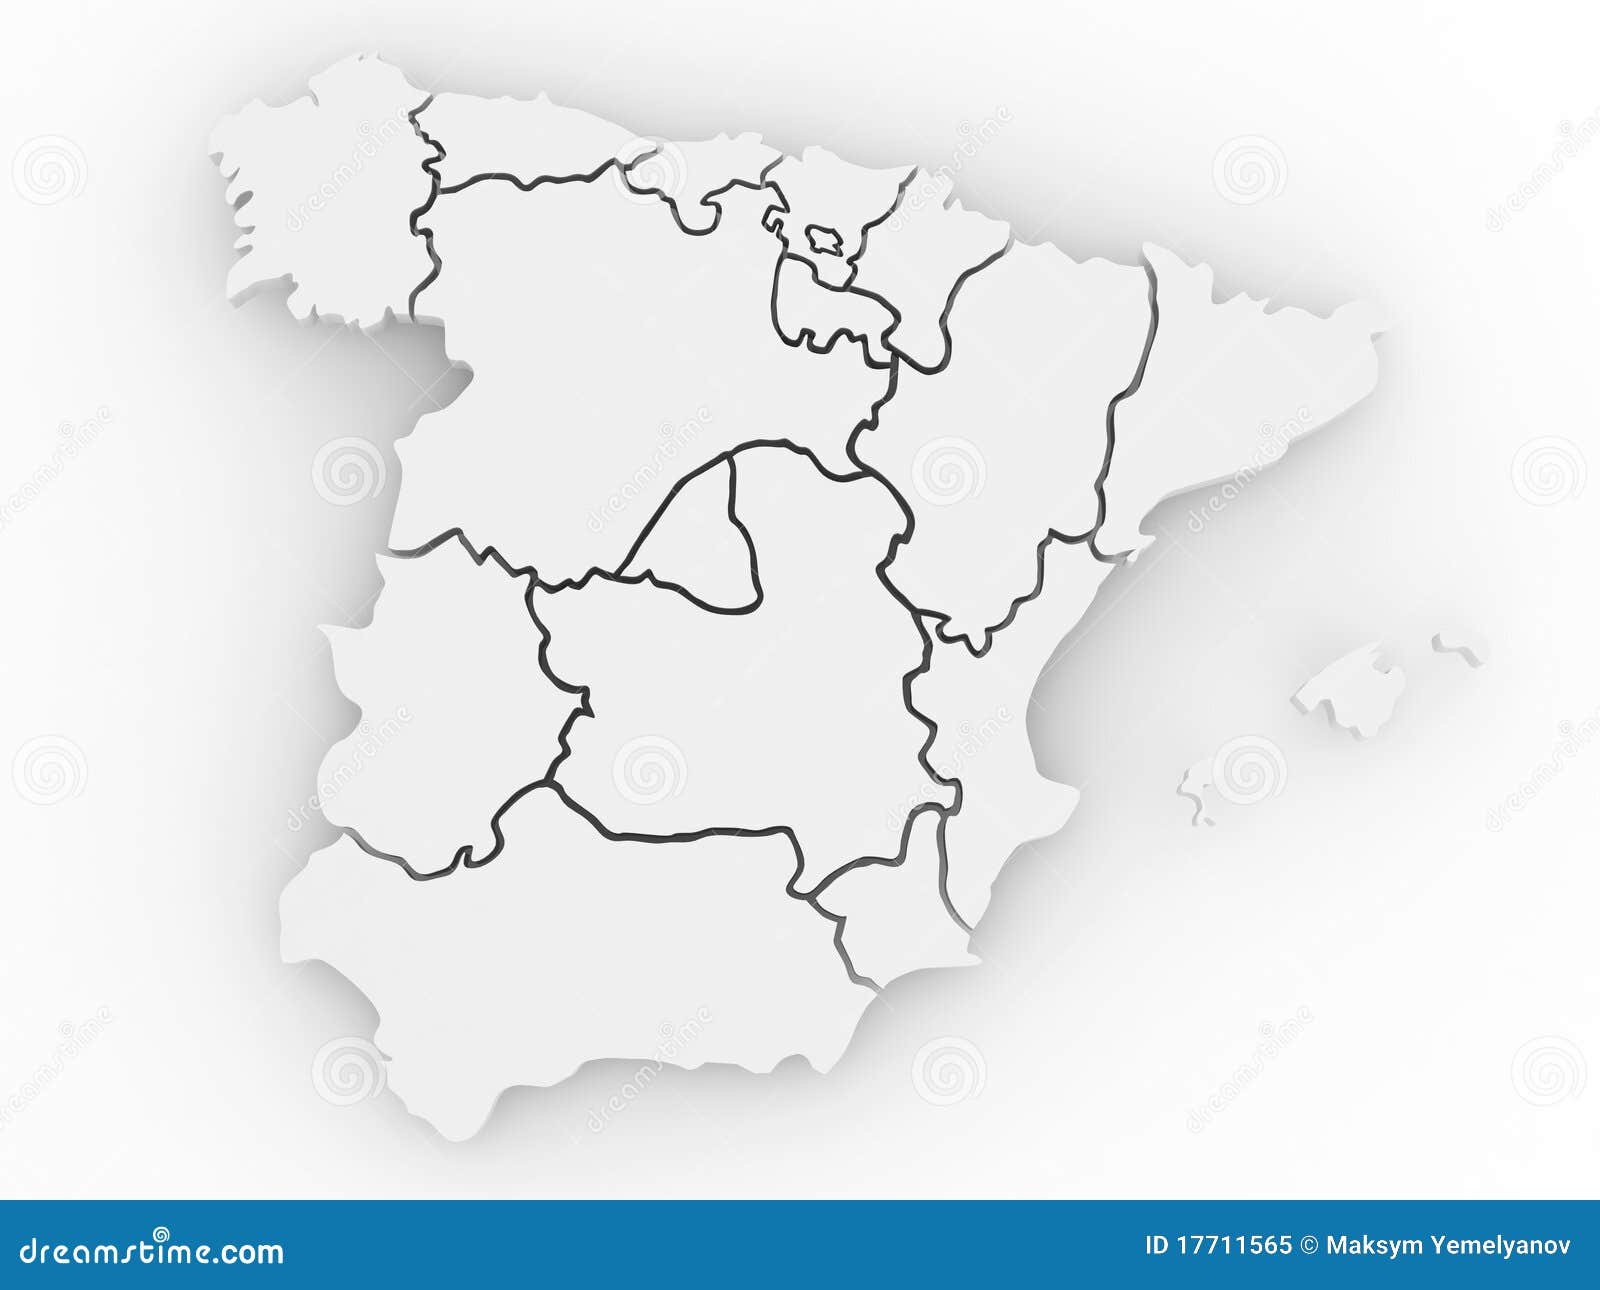 three-dimensional map of spain. 3d